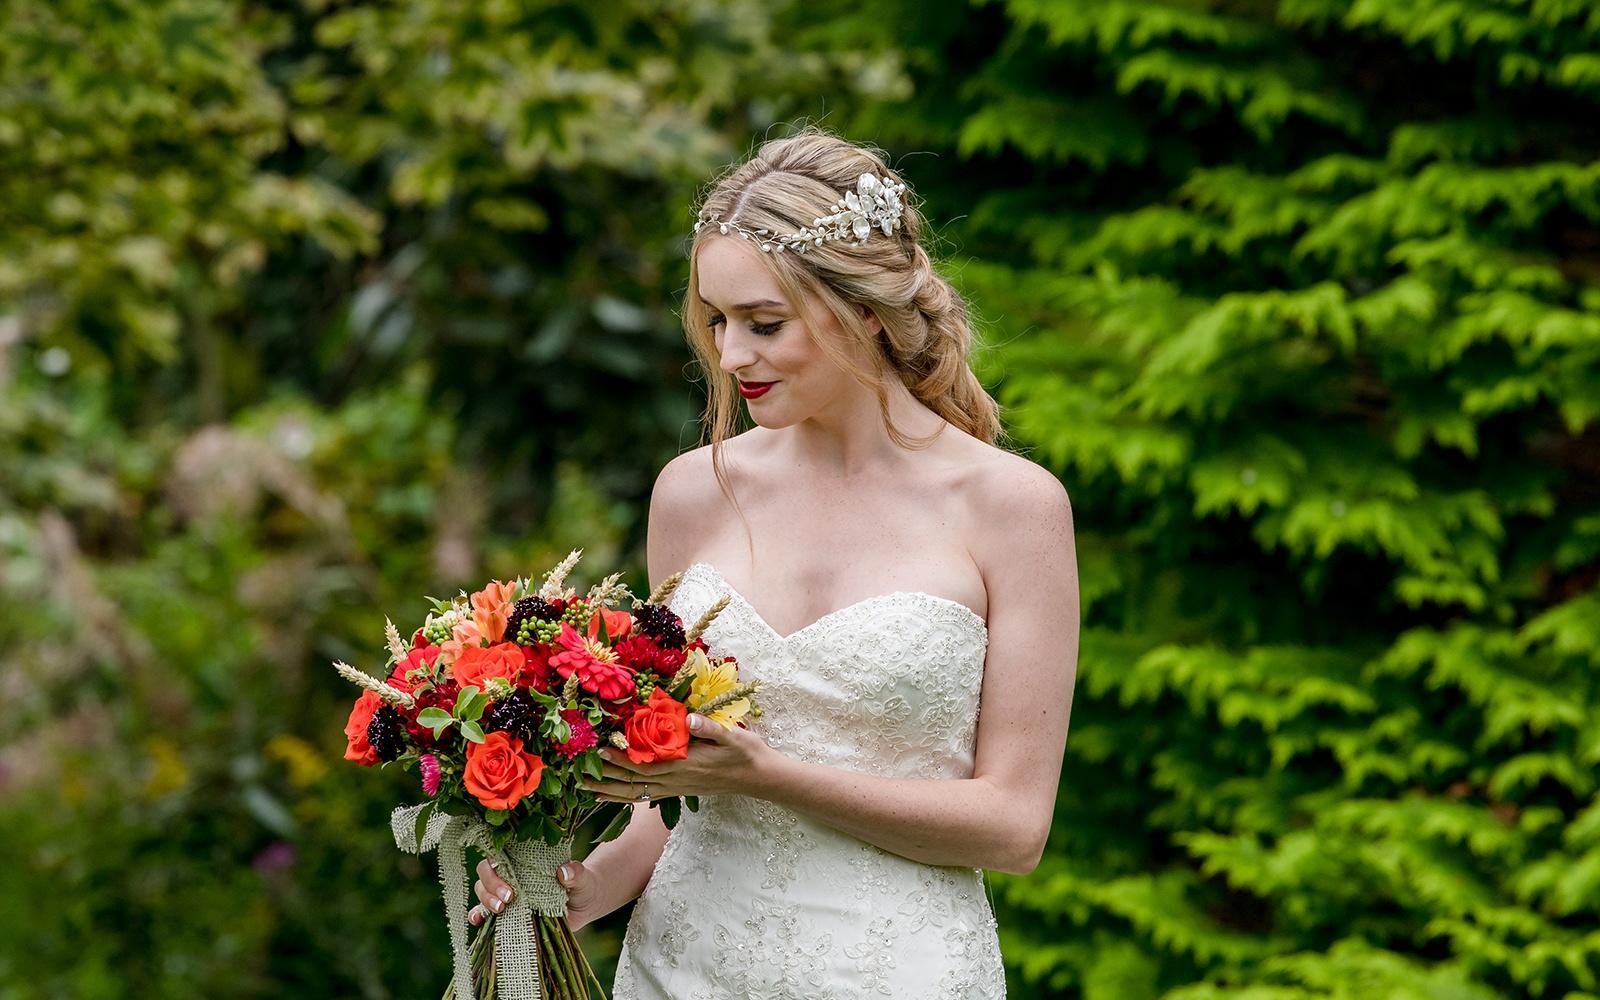 Make Up By Carissa makeup artist Cirencester Gloucestershire cruelty free make-up styled shoot Stratton House Cotswold orange roses bridal bouquet